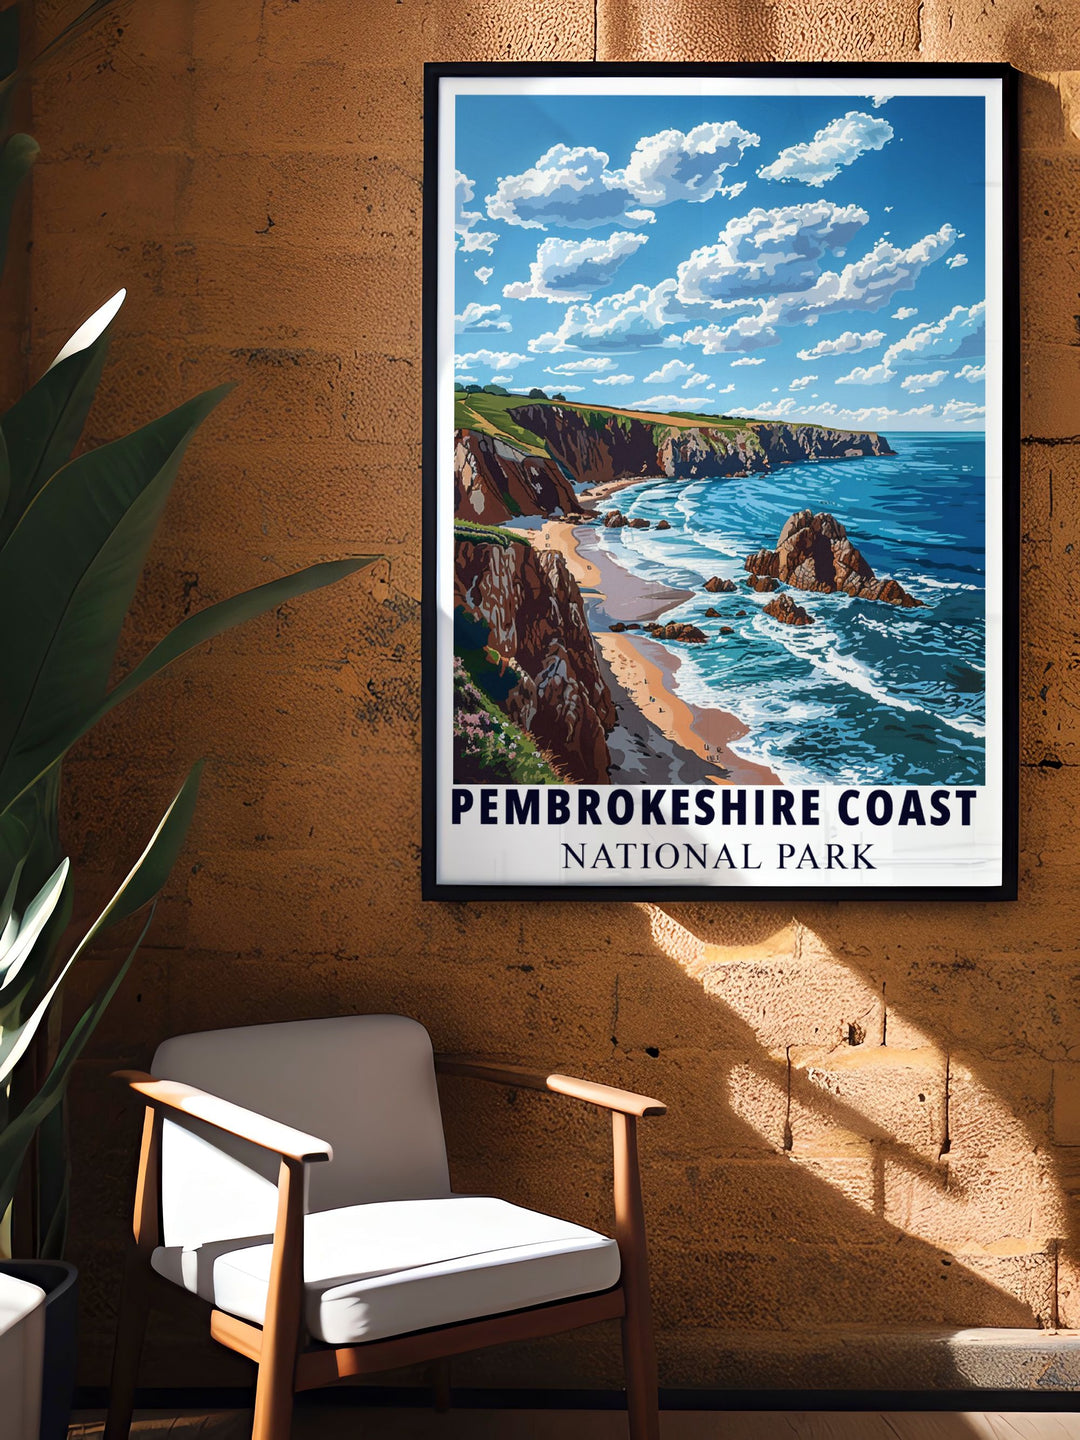 Journey through the stunning landscapes of Pembrokeshire Coast National Park with this detailed art print, showcasing the rocky shores and peaceful ambiance that characterize this national park.